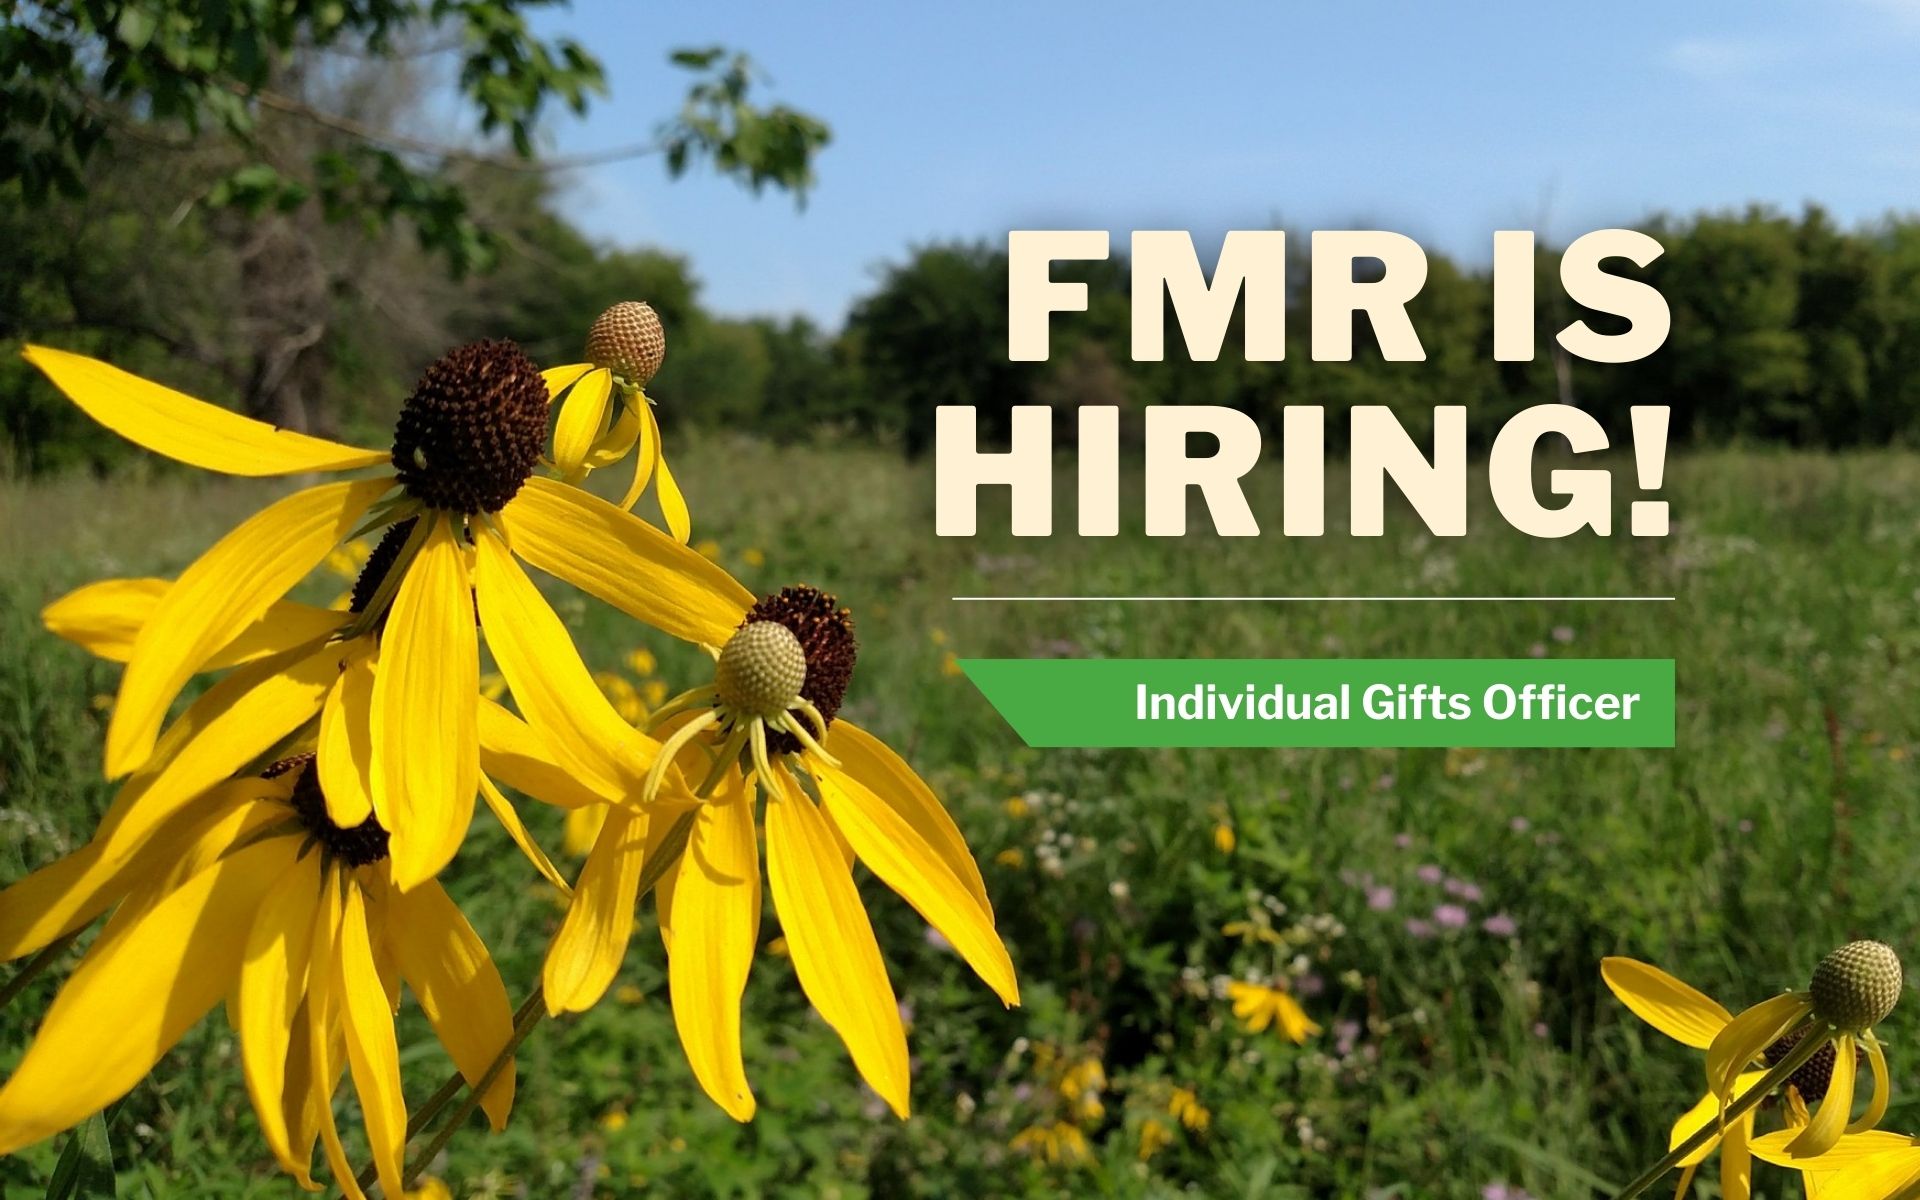 Coneflower in field plus text: FMR is hiring! Individual Gifts Officer